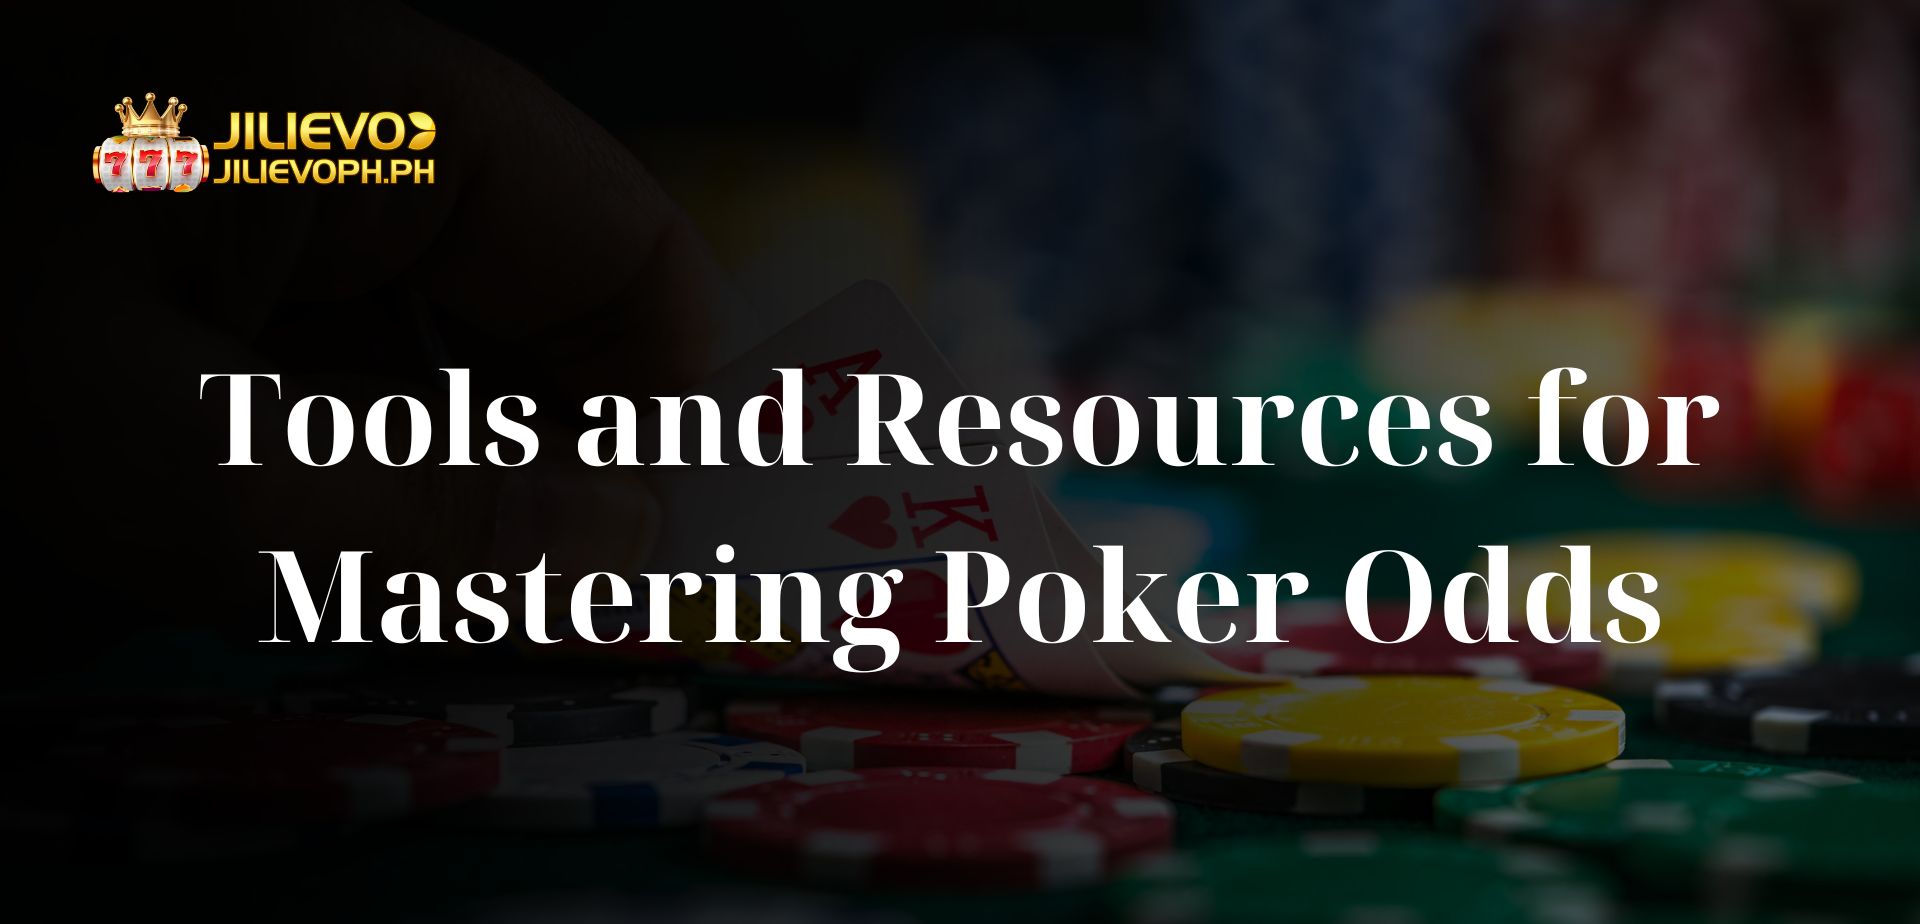 Tools and Resources for Mastering Poker Odds